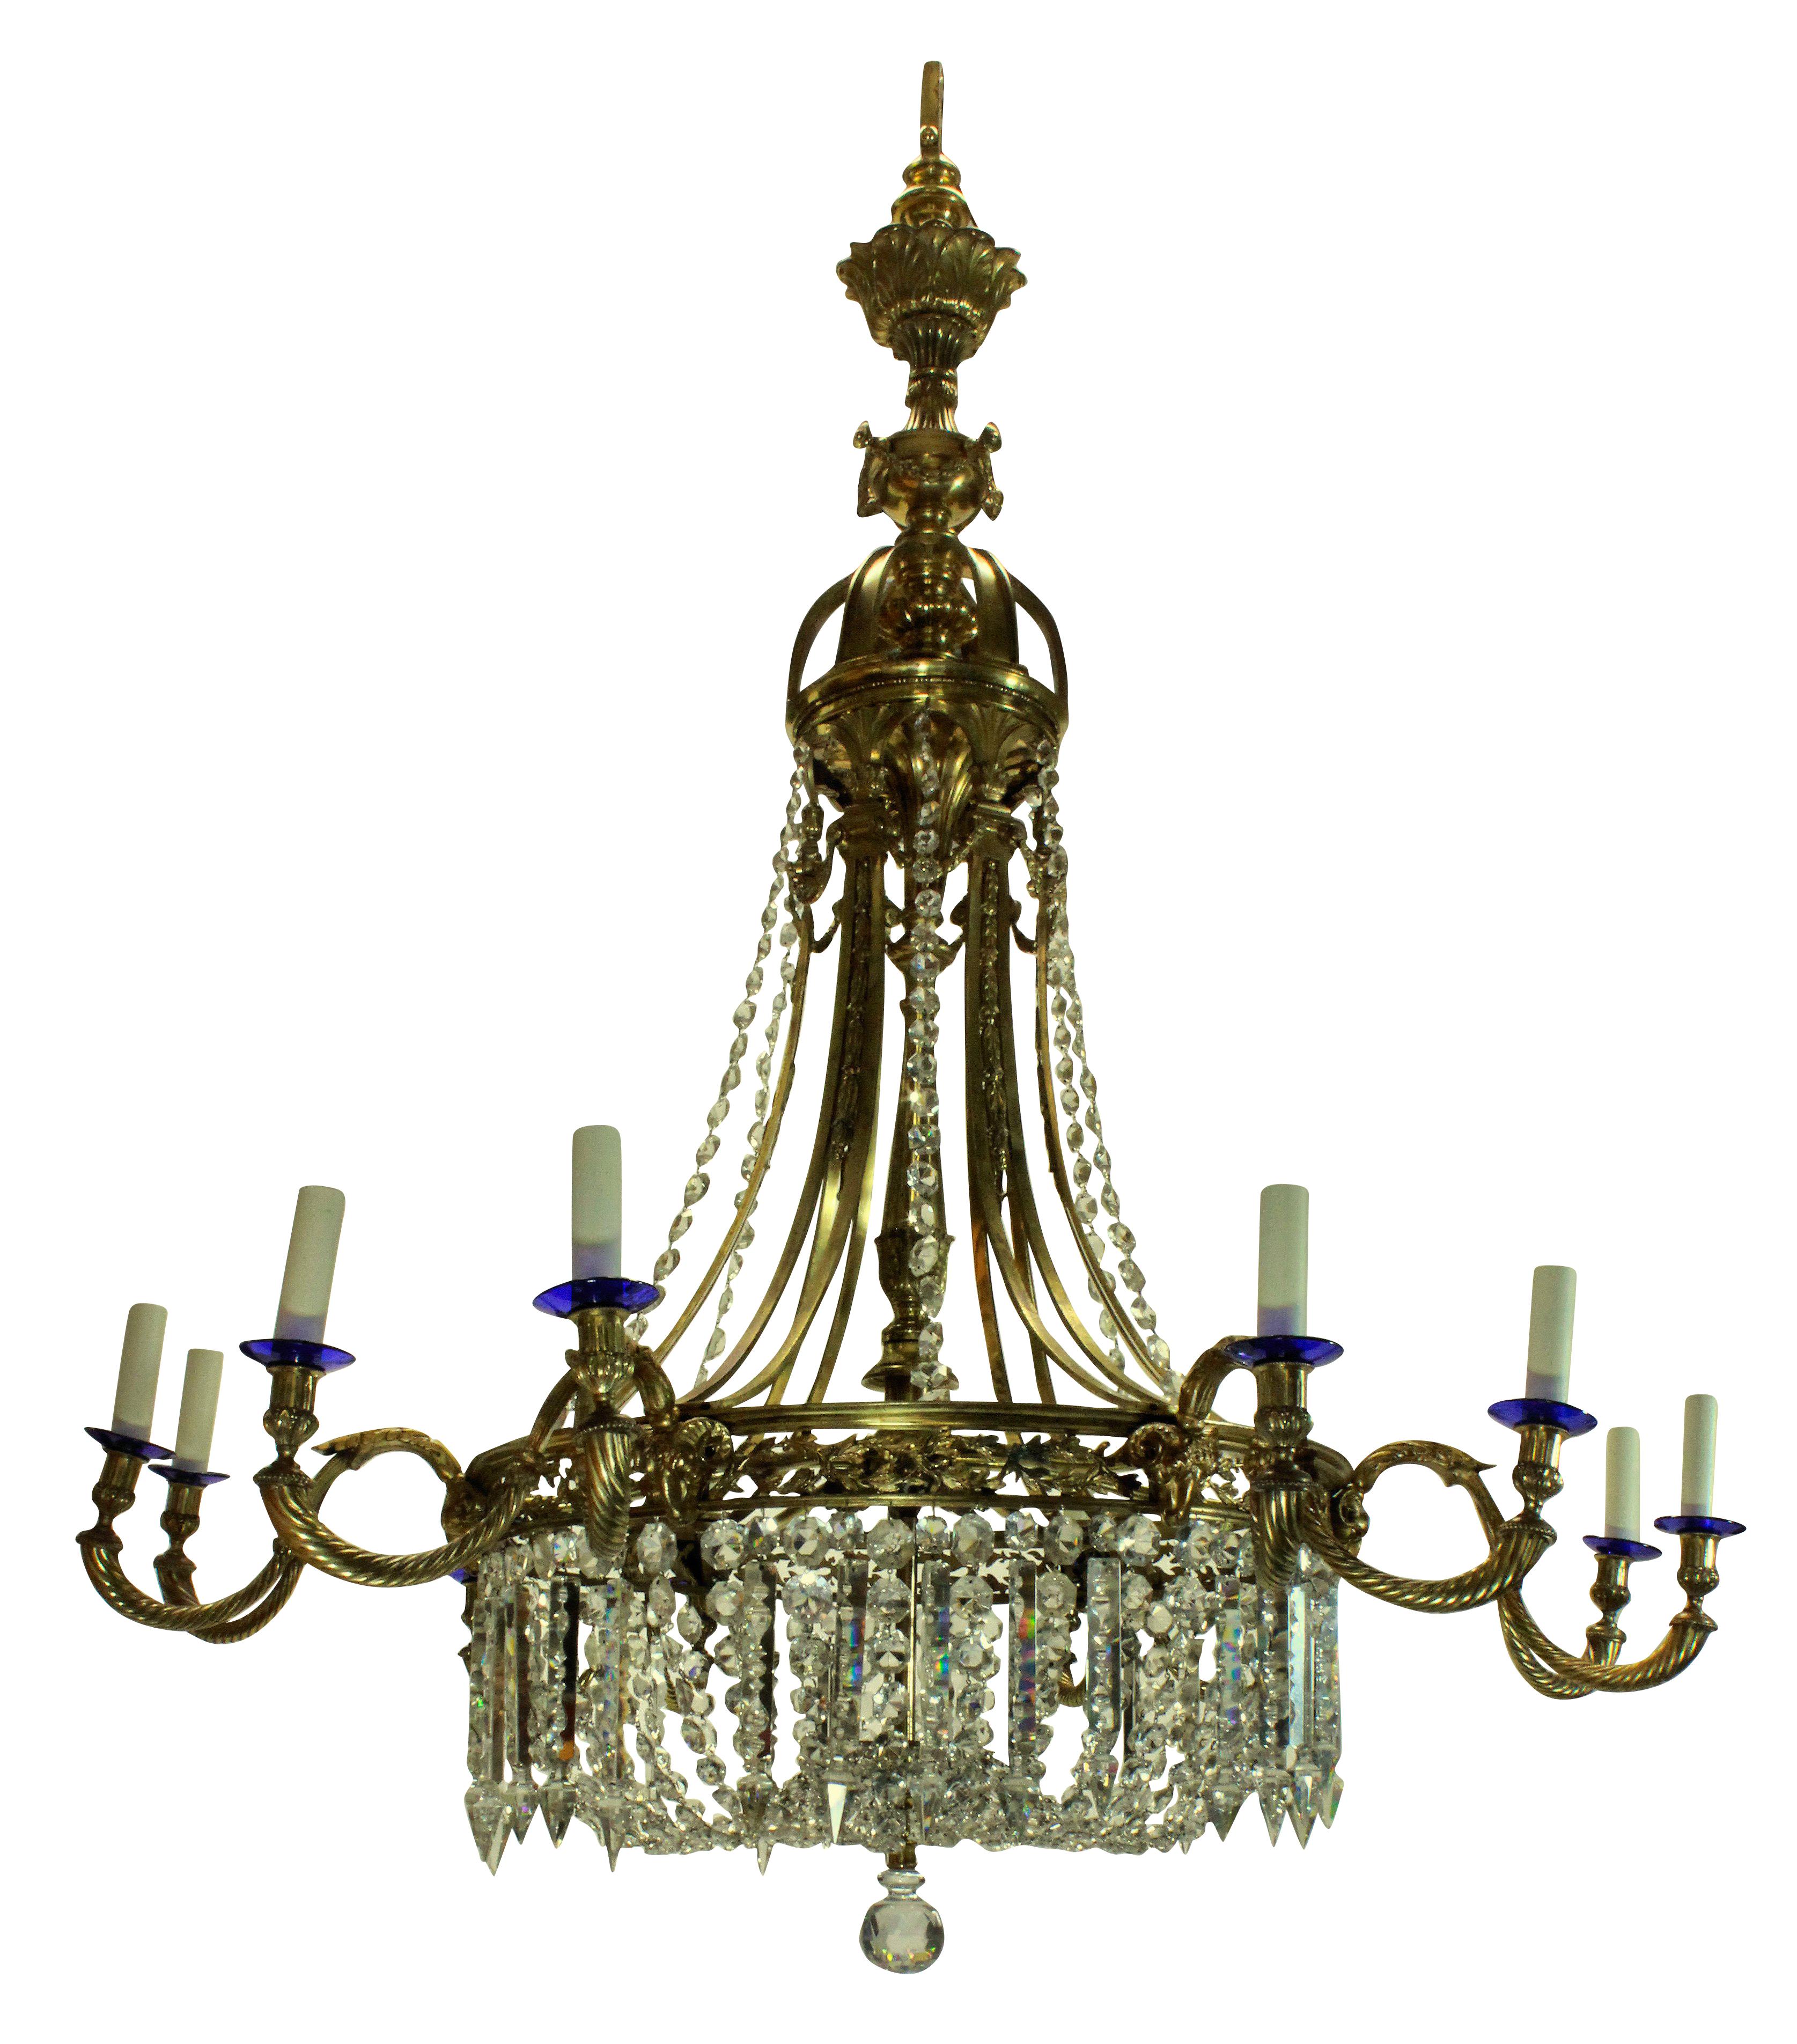 British Large Gilt Bronze and Cut Glass Regency Style Chandelier For Sale